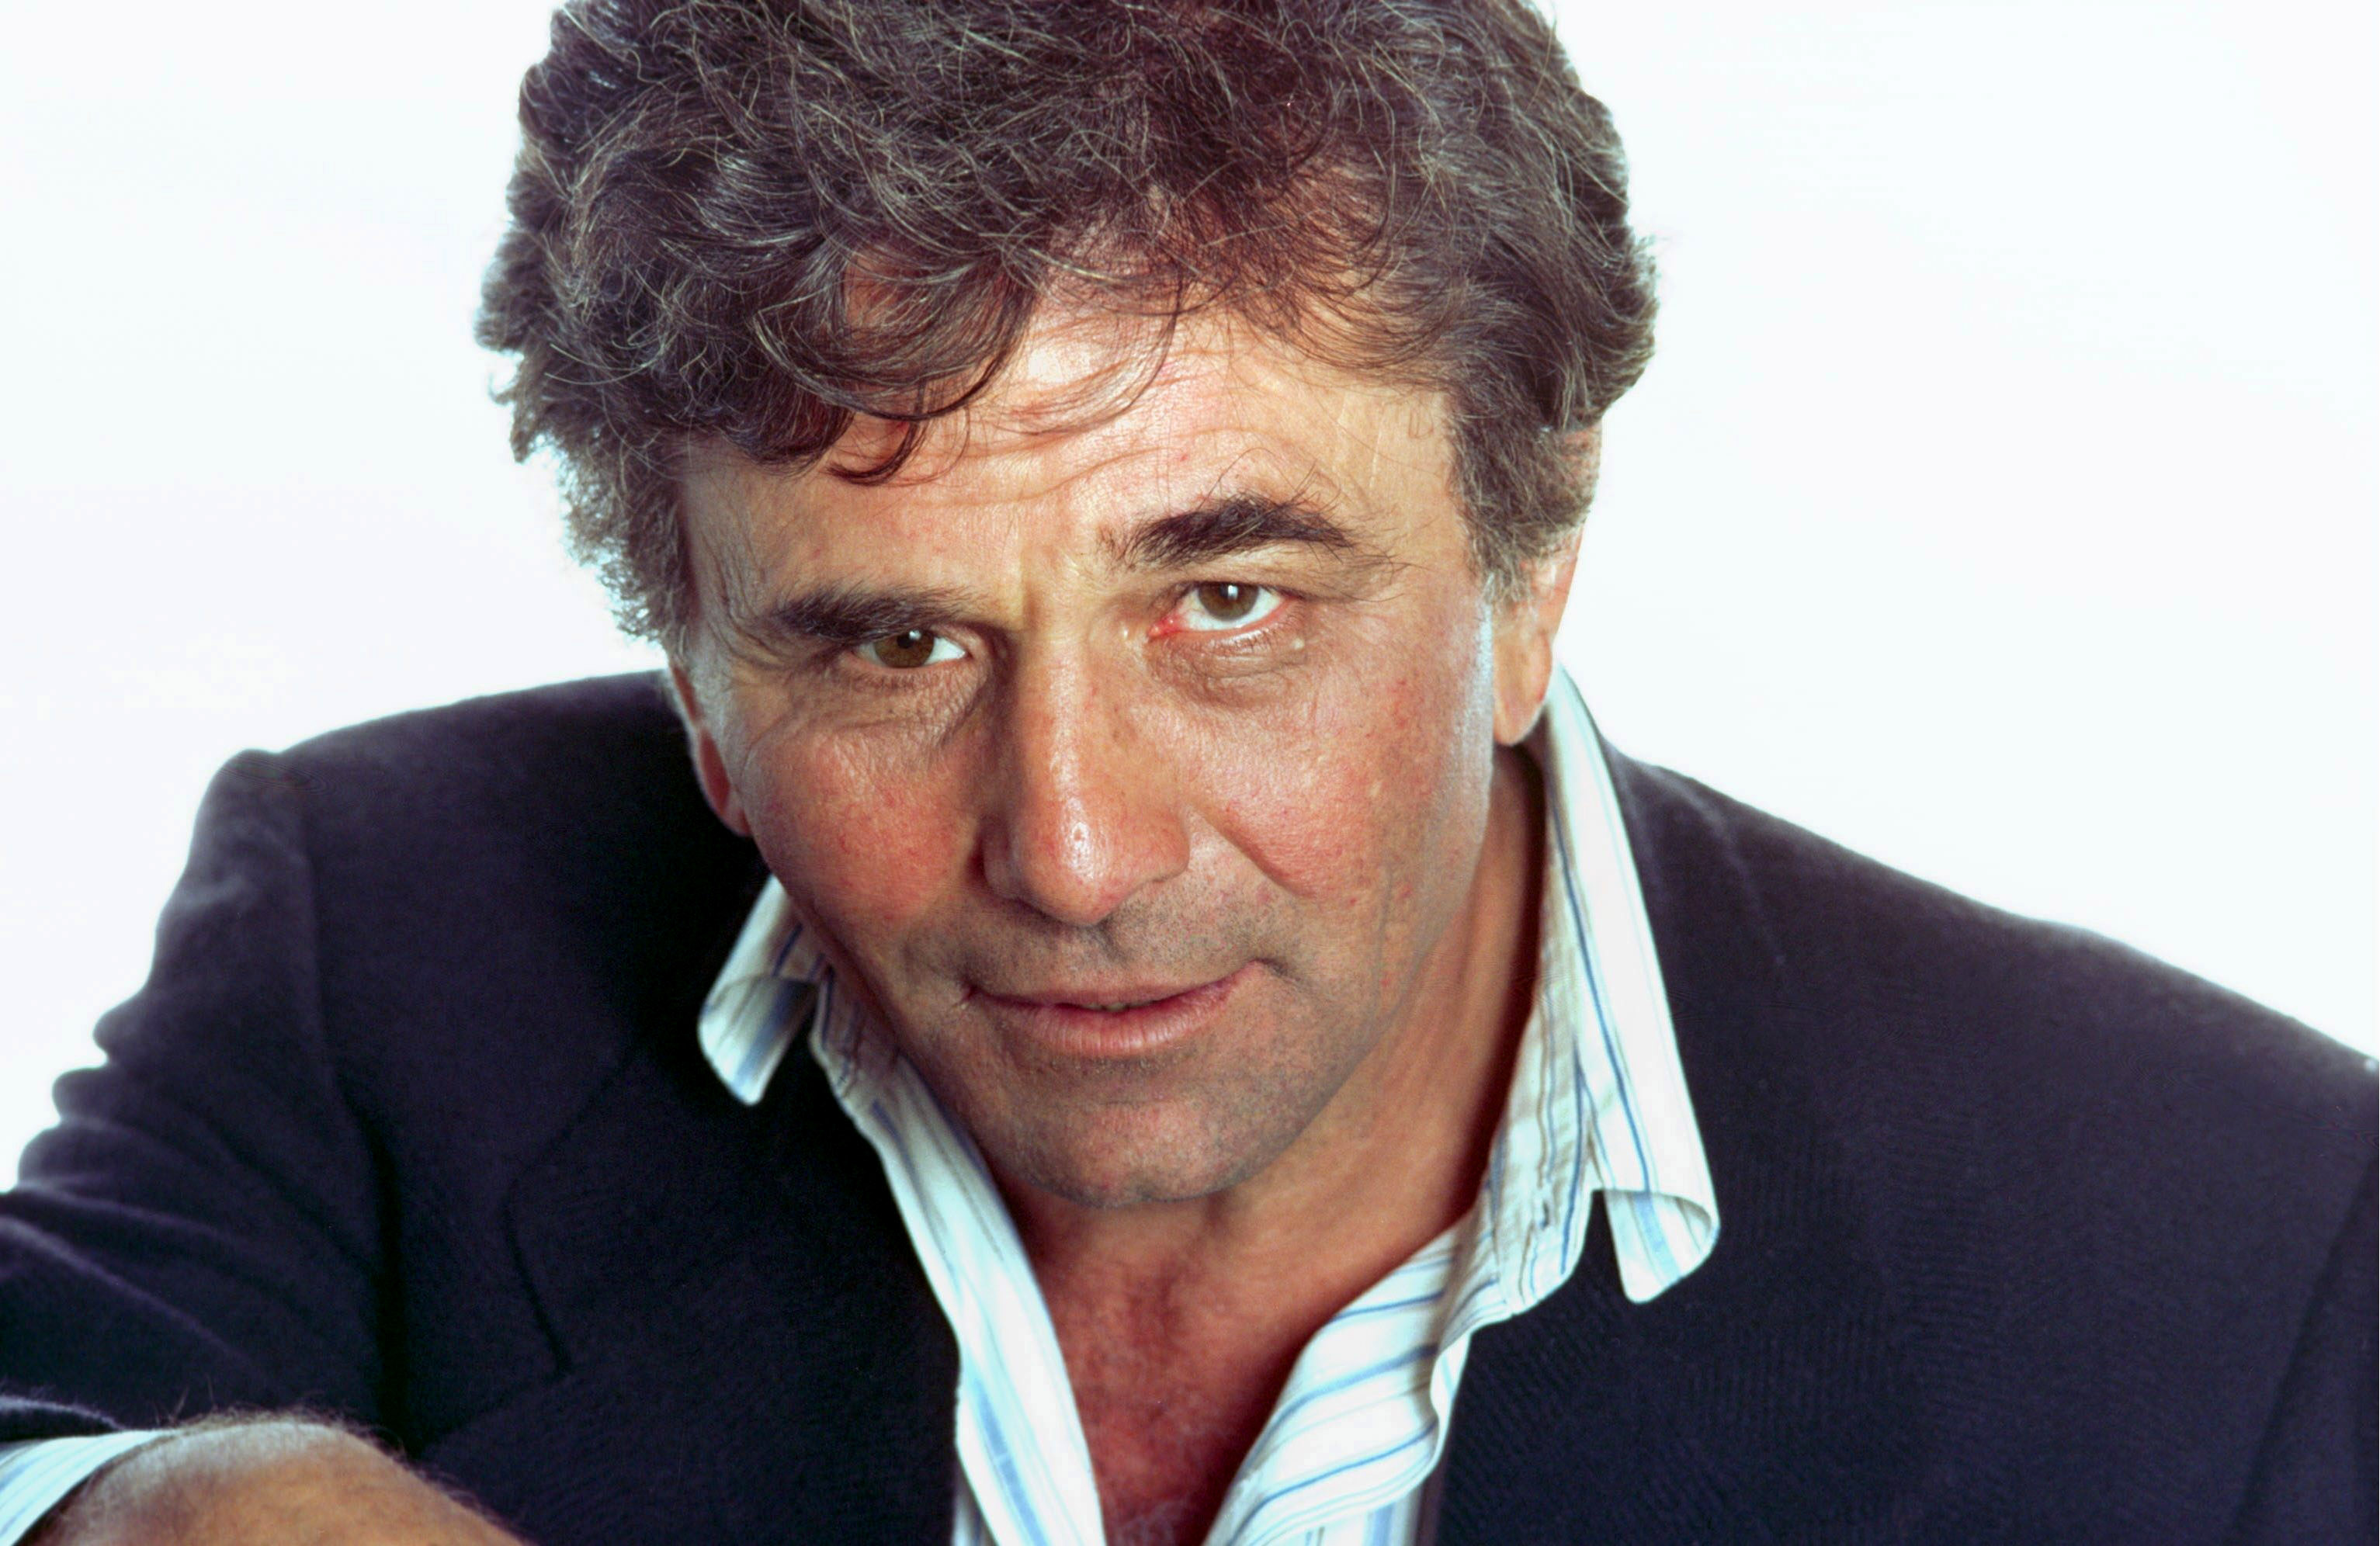 American actor Peter Falk, best known for his role as Lieutenant Columbo in the television series Columbo, poses for a photograh during a visit to Michel Drucker's TV Show 'Champs-Elysees' in 1982 in Paris, France. | Source: Getty Images